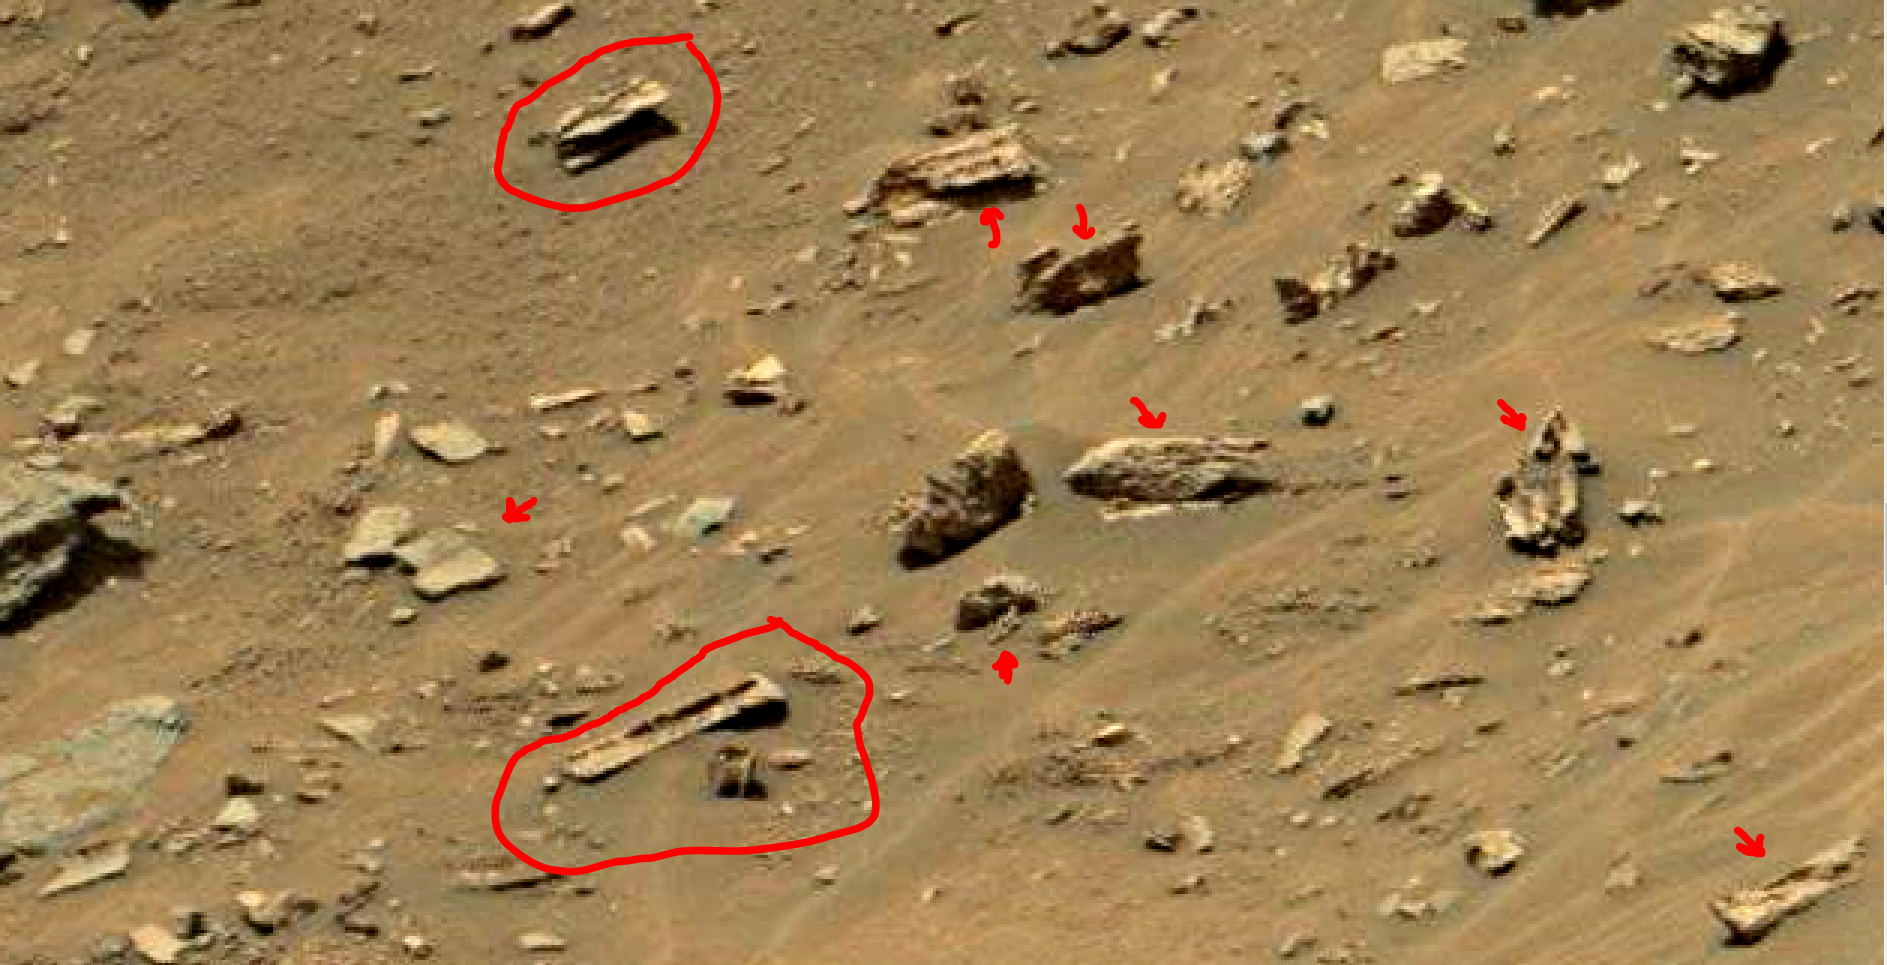 mars sol 1447 anomaly artifacts 9 - was life on mars